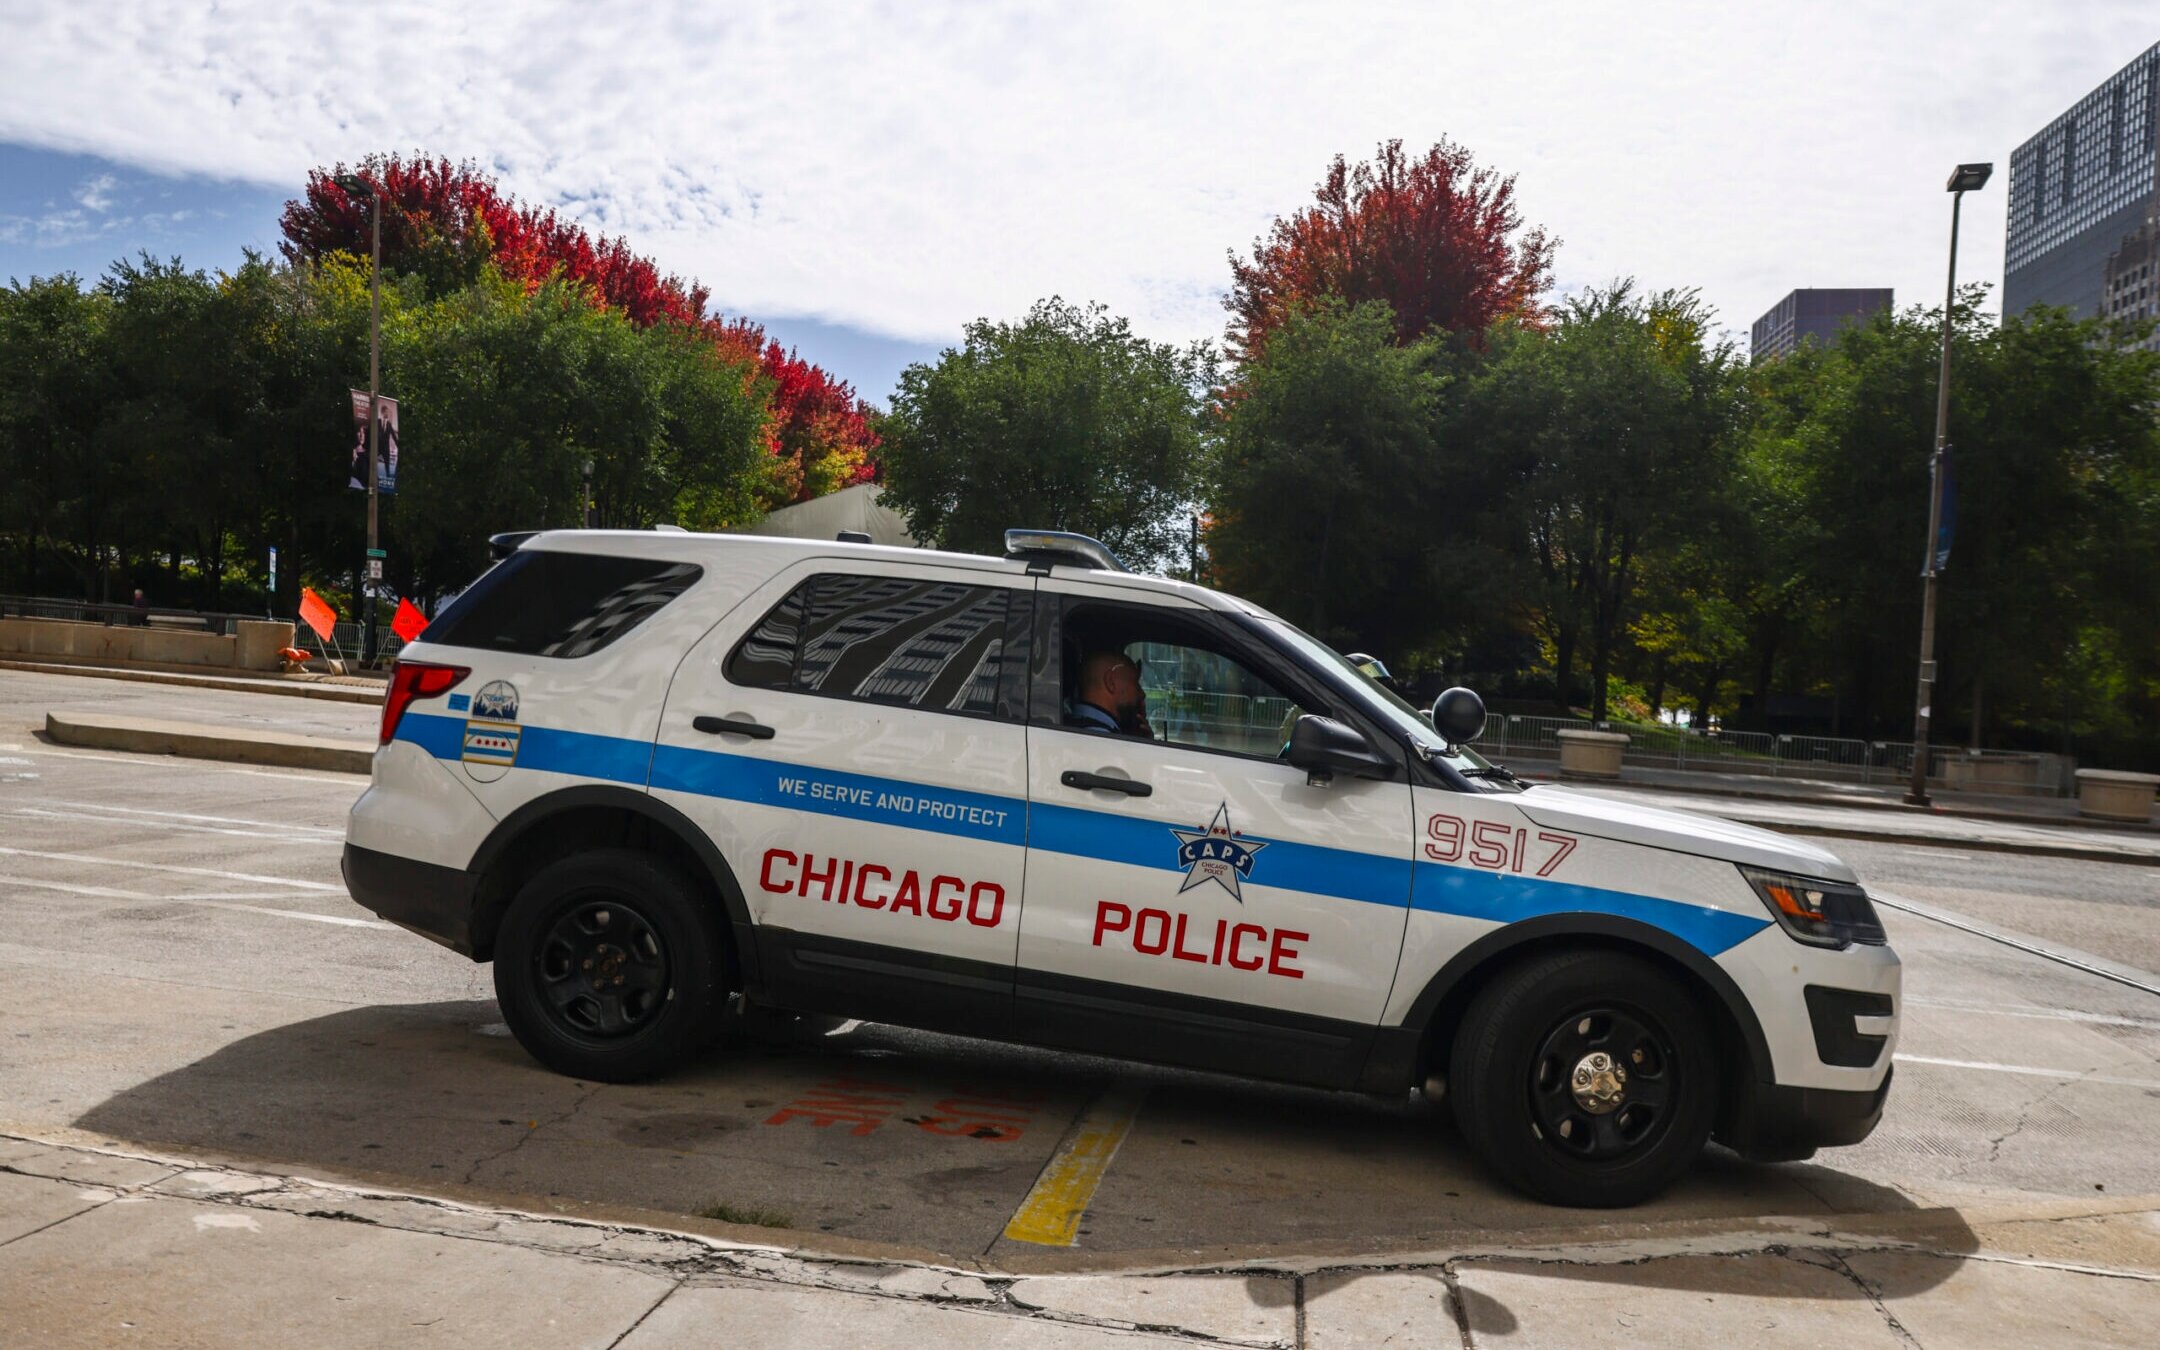 A Chicago police car is seen in Chicago, Oct. 14, 2022. (Beata Zawrzel/NurPhoto via Getty Images)